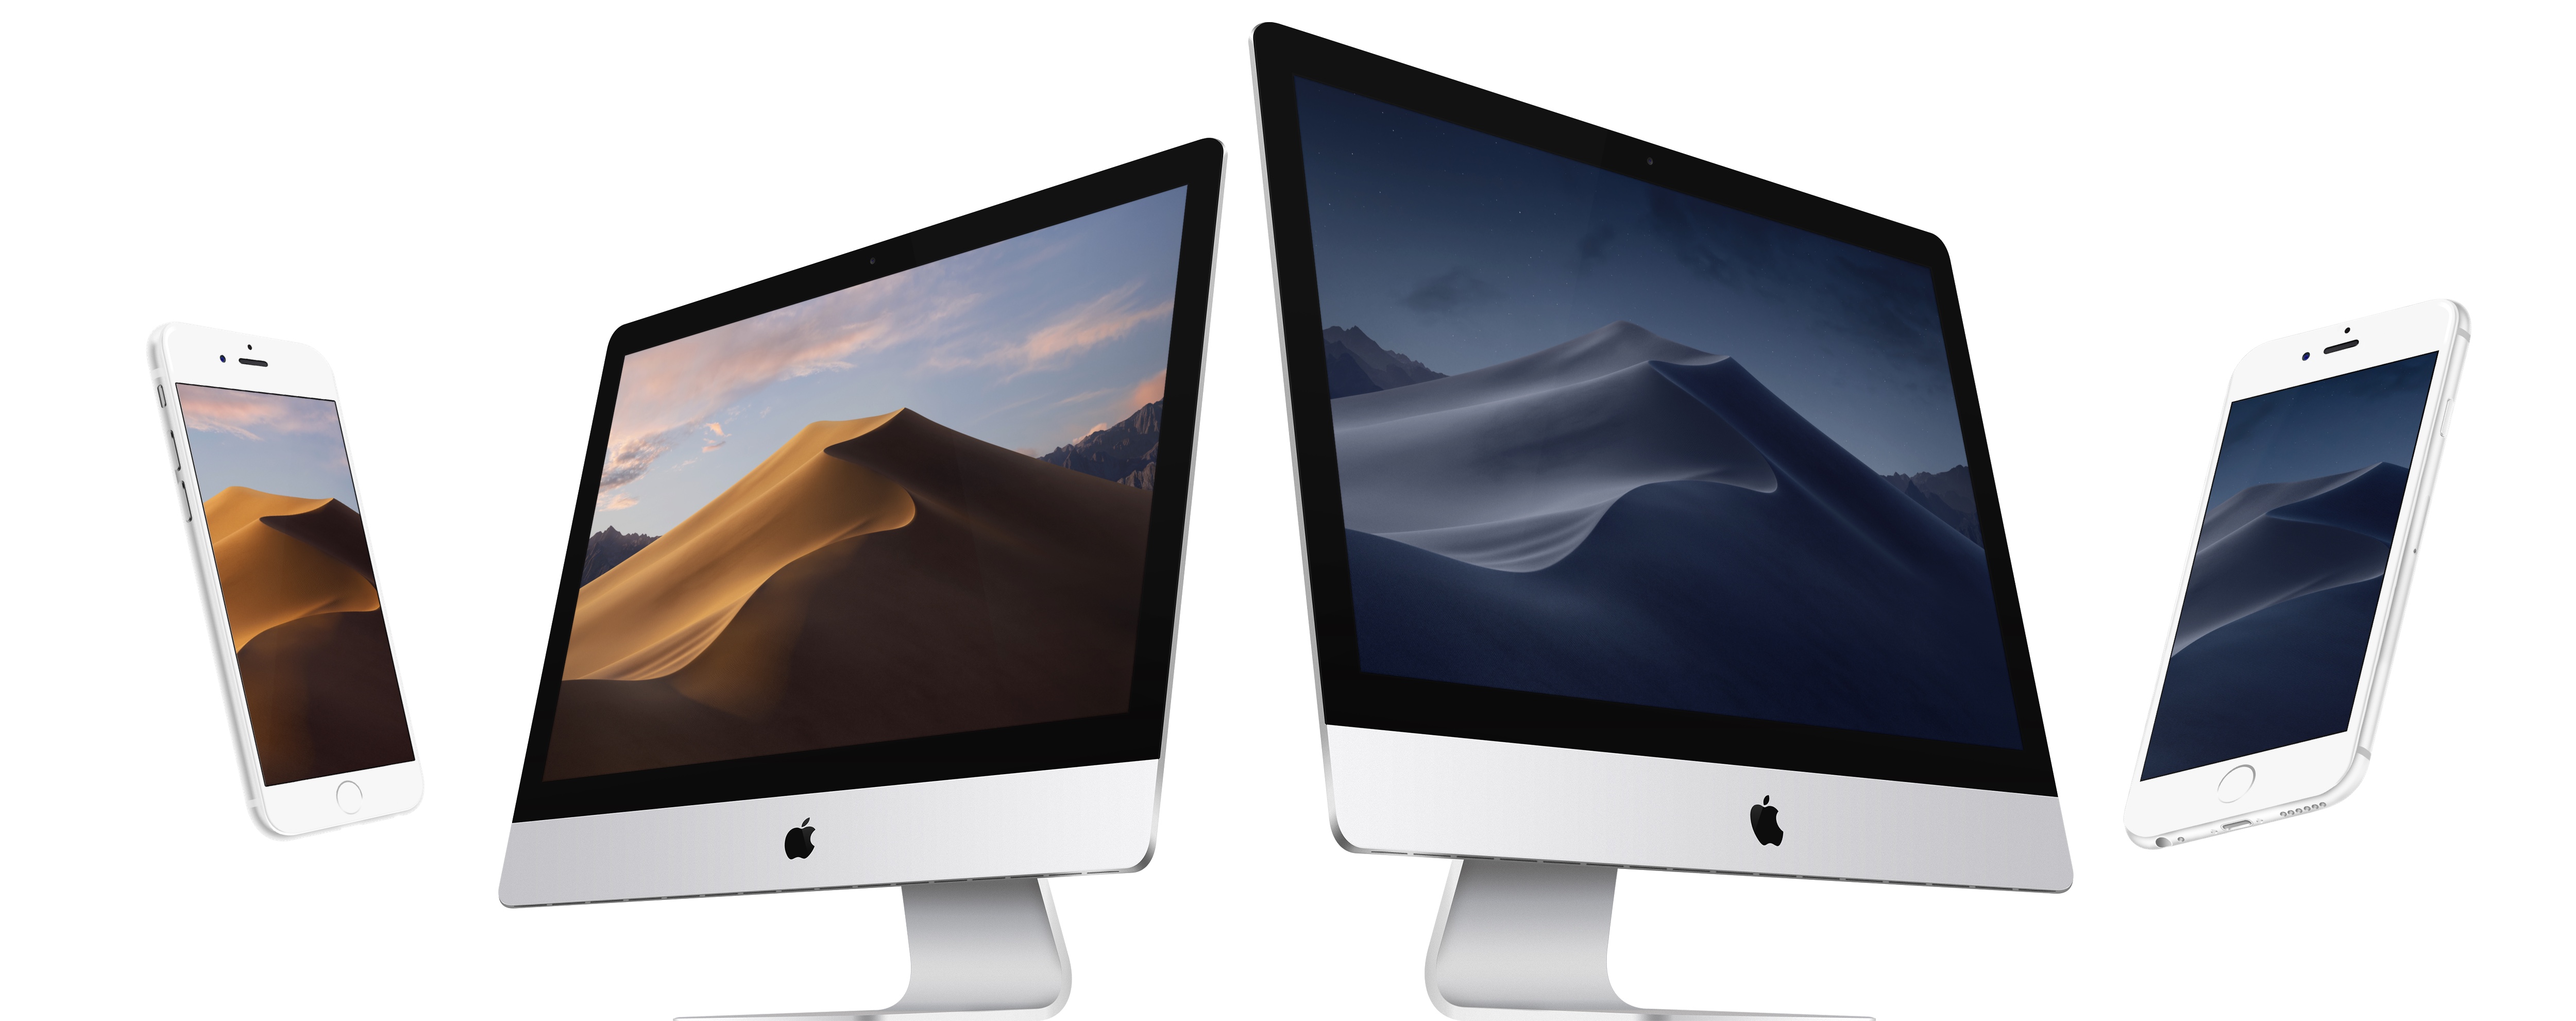 macOS Mojave wallpapers for iPhone and Mac